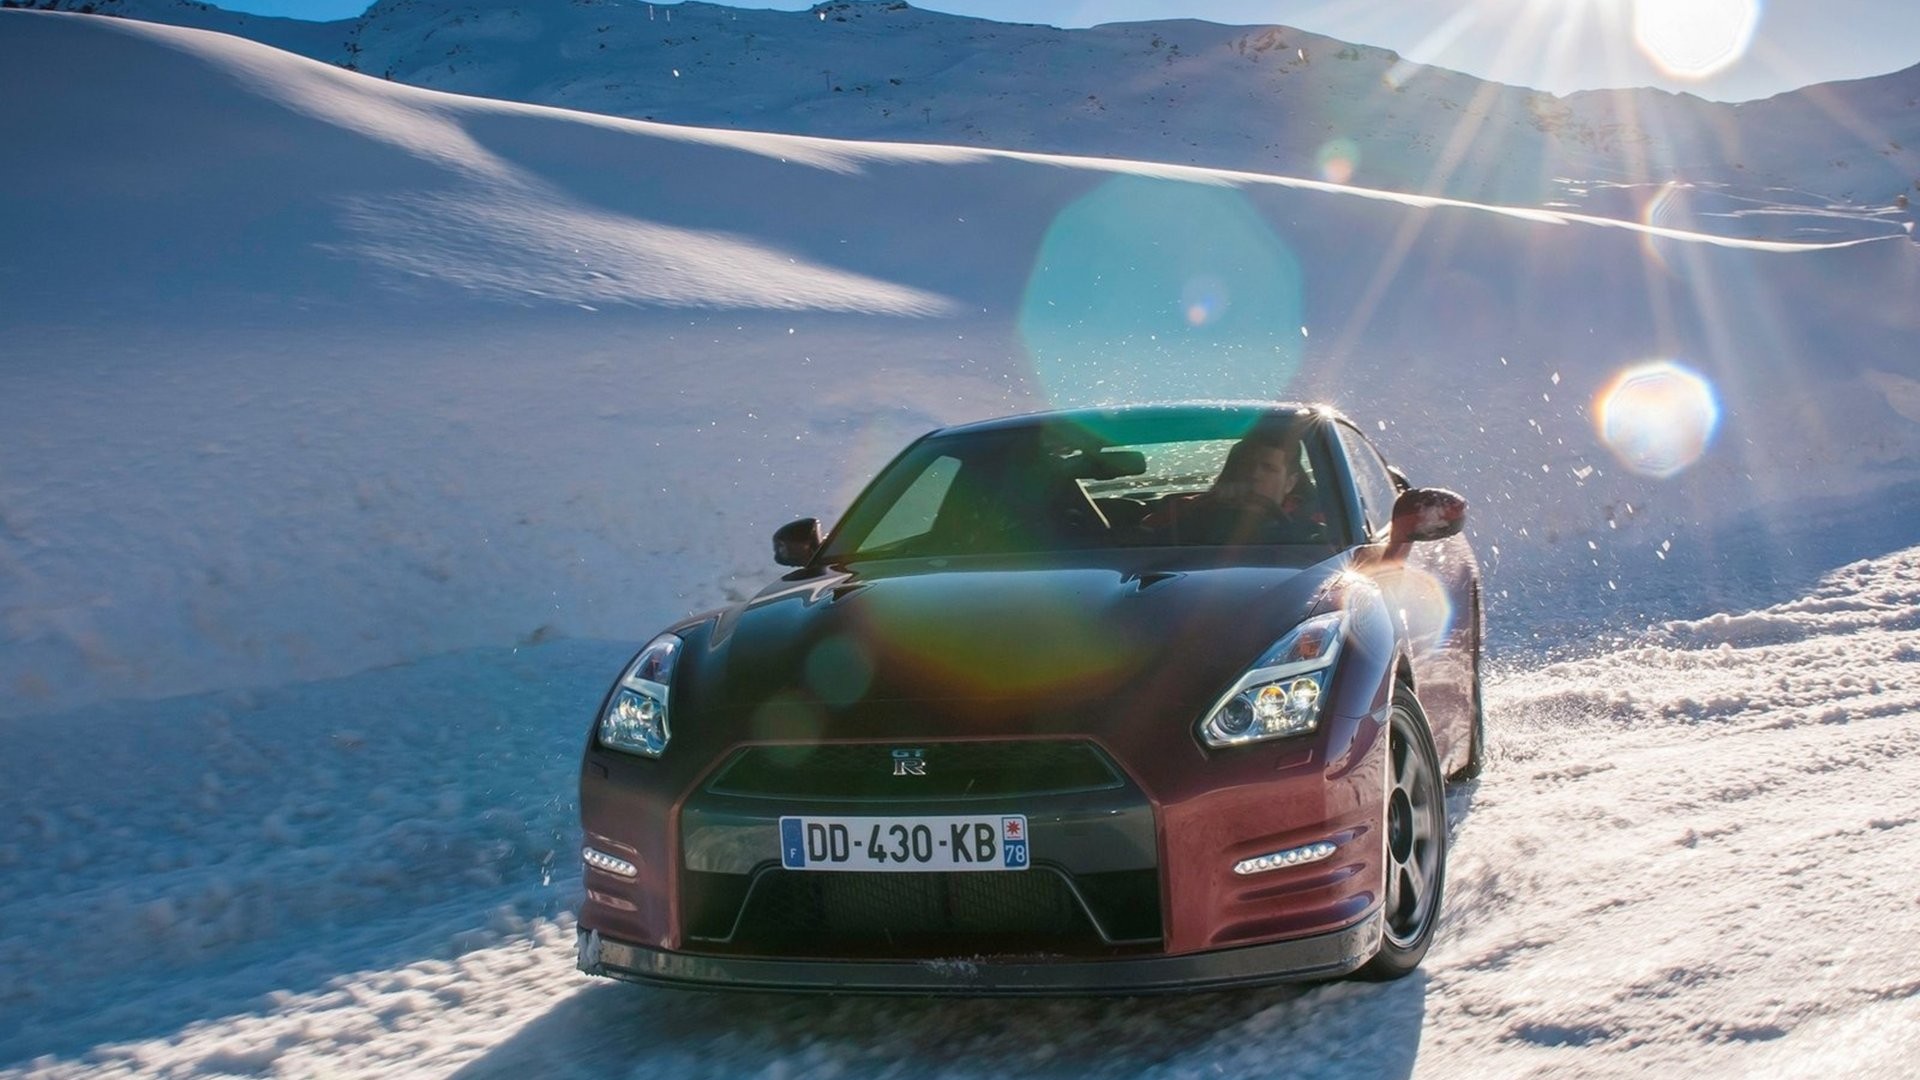 General 1920x1080 Nissan Nissan GT-R winter car red cars vehicle numbers snow Japanese cars